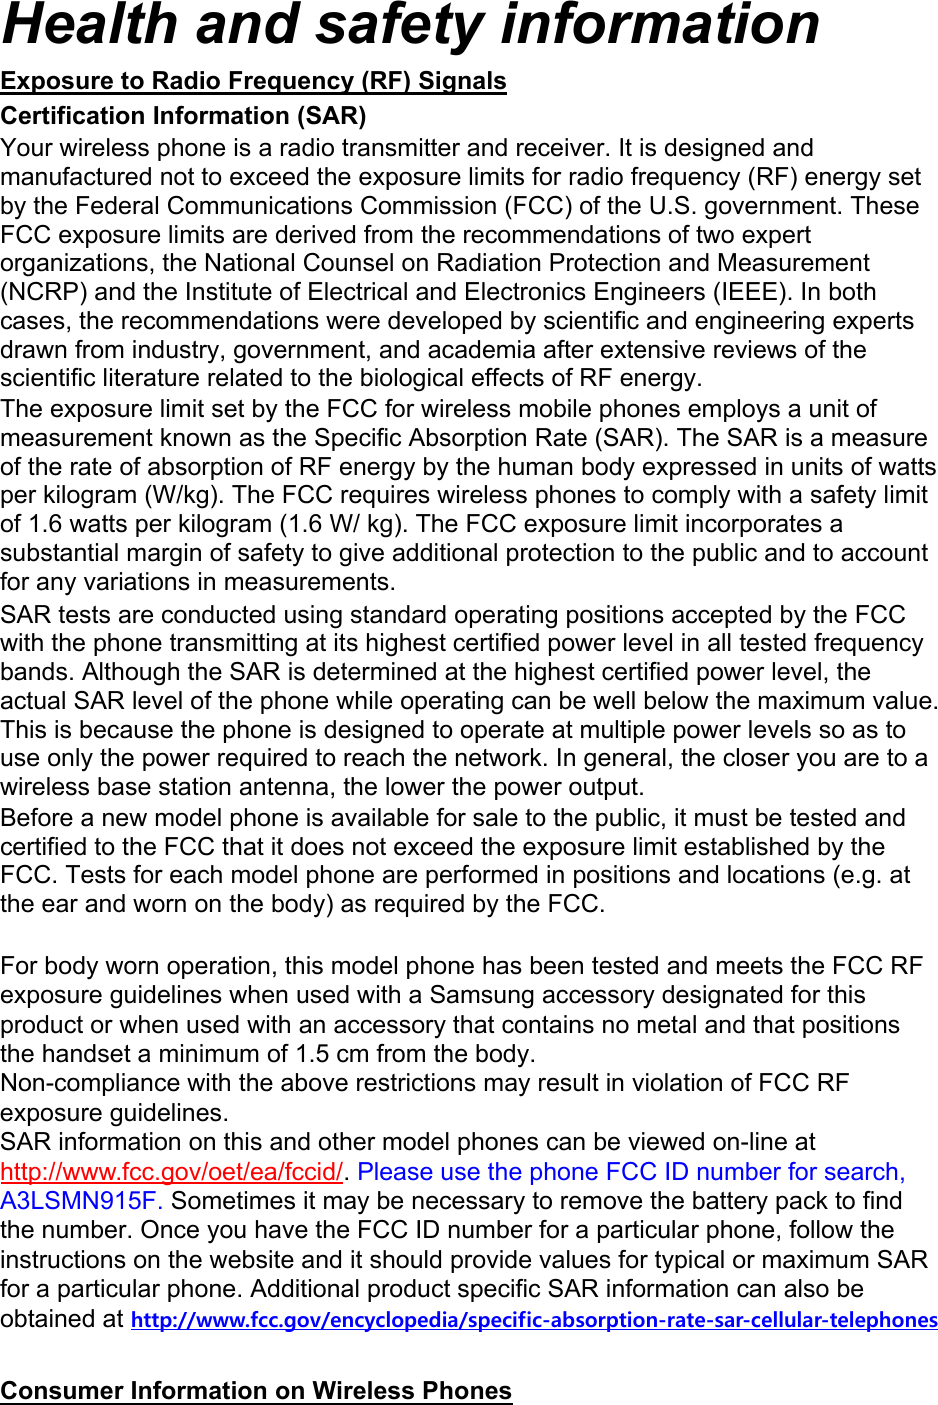 Health and safety information Exposure to Radio Frequency (RF) Signals Certification Information (SAR) Your wireless phone is a radio transmitter and receiver. It is designed and manufactured not to exceed the exposure limits for radio frequency (RF) energy set by the Federal Communications Commission (FCC) of the U.S. government. These FCC exposure limits are derived from the recommendations of two expert organizations, the National Counsel on Radiation Protection and Measurement (NCRP) and the Institute of Electrical and Electronics Engineers (IEEE). In both cases, the recommendations were developed by scientific and engineering experts drawn from industry, government, and academia after extensive reviews of the scientific literature related to the biological effects of RF energy. The exposure limit set by the FCC for wireless mobile phones employs a unit of measurement known as the Specific Absorption Rate (SAR). The SAR is a measure of the rate of absorption of RF energy by the human body expressed in units of watts per kilogram (W/kg). The FCC requires wireless phones to comply with a safety limit of 1.6 watts per kilogram (1.6 W/ kg). The FCC exposure limit incorporates a substantial margin of safety to give additional protection to the public and to account for any variations in measurements. SAR tests are conducted using standard operating positions accepted by the FCC with the phone transmitting at its highest certified power level in all tested frequency bands. Although the SAR is determined at the highest certified power level, the actual SAR level of the phone while operating can be well below the maximum value. This is because the phone is designed to operate at multiple power levels so as to use only the power required to reach the network. In general, the closer you are to a wireless base station antenna, the lower the power output. Before a new model phone is available for sale to the public, it must be tested and certified to the FCC that it does not exceed the exposure limit established by the FCC. Tests for each model phone are performed in positions and locations (e.g. at the ear and worn on the body) as required by the FCC.     For body worn operation, this model phone has been tested and meets the FCC RF exposure guidelines when used with a Samsung accessory designated for this product or when used with an accessory that contains no metal and that positions the handset a minimum of 1.5 cm from the body.  Non-compliance with the above restrictions may result in violation of FCC RF exposure guidelines. SAR information on this and other model phones can be viewed on-line at http://www.fcc.gov/oet/ea/fccid/. Please use the phone FCC ID number for search, A3LSMN915F. Sometimes it may be necessary to remove the battery pack to find the number. Once you have the FCC ID number for a particular phone, follow the instructions on the website and it should provide values for typical or maximum SAR for a particular phone. Additional product specific SAR information can also be obtained at http://www.fcc.gov/encyclopedia/specific-absorption-rate-sar-cellular-telephonesConsumer Information on Wireless Phones 